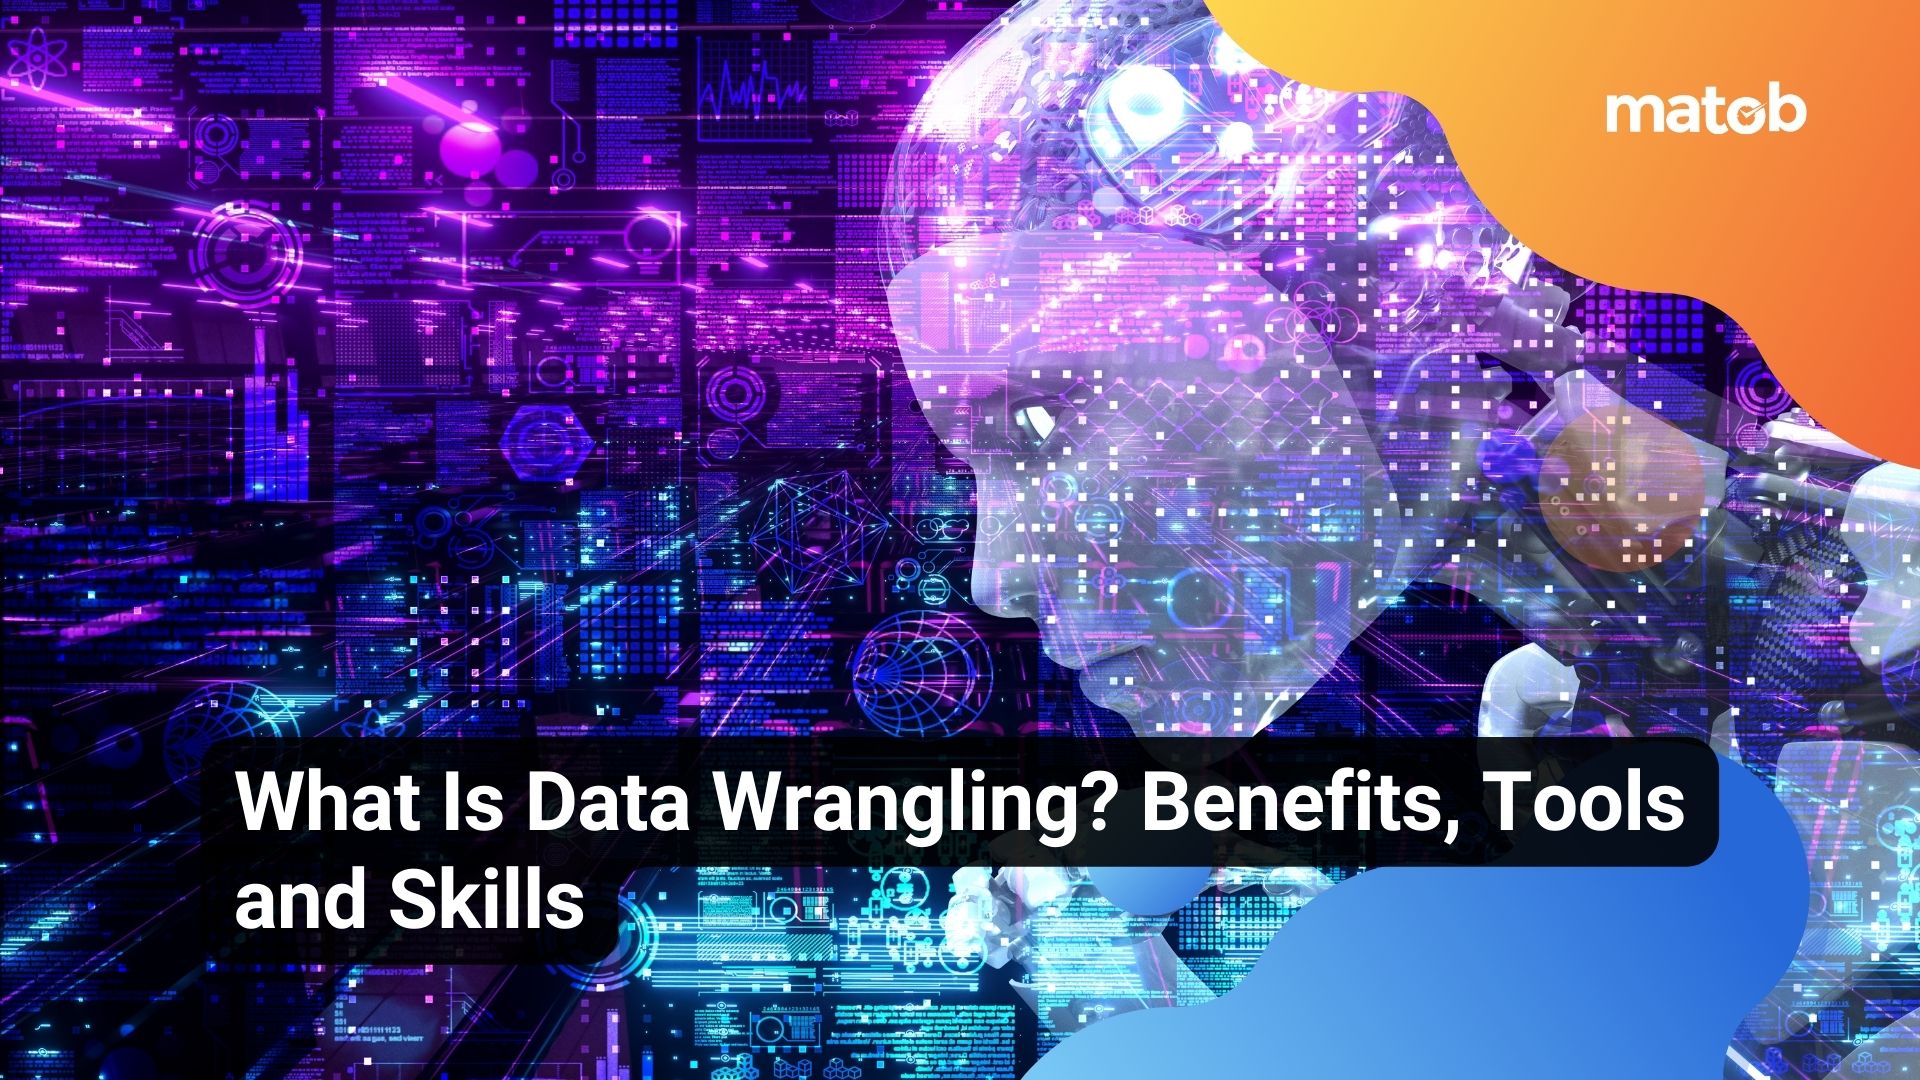 What Is Data Wrangling? Benefits, Tools and Skills